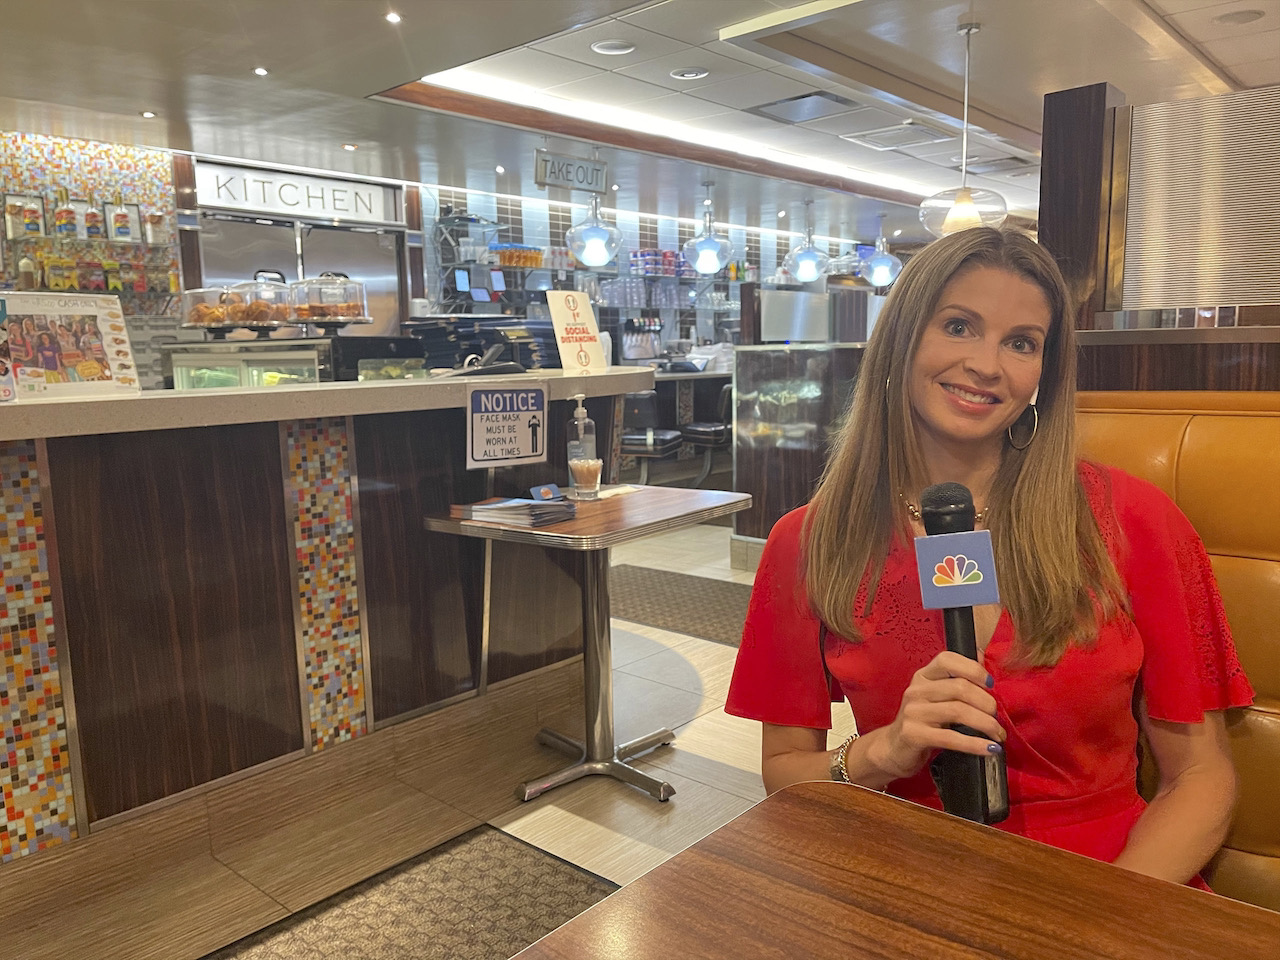 Jen anchoring in the field, sitting in a diner booth, smiling in a red dress.